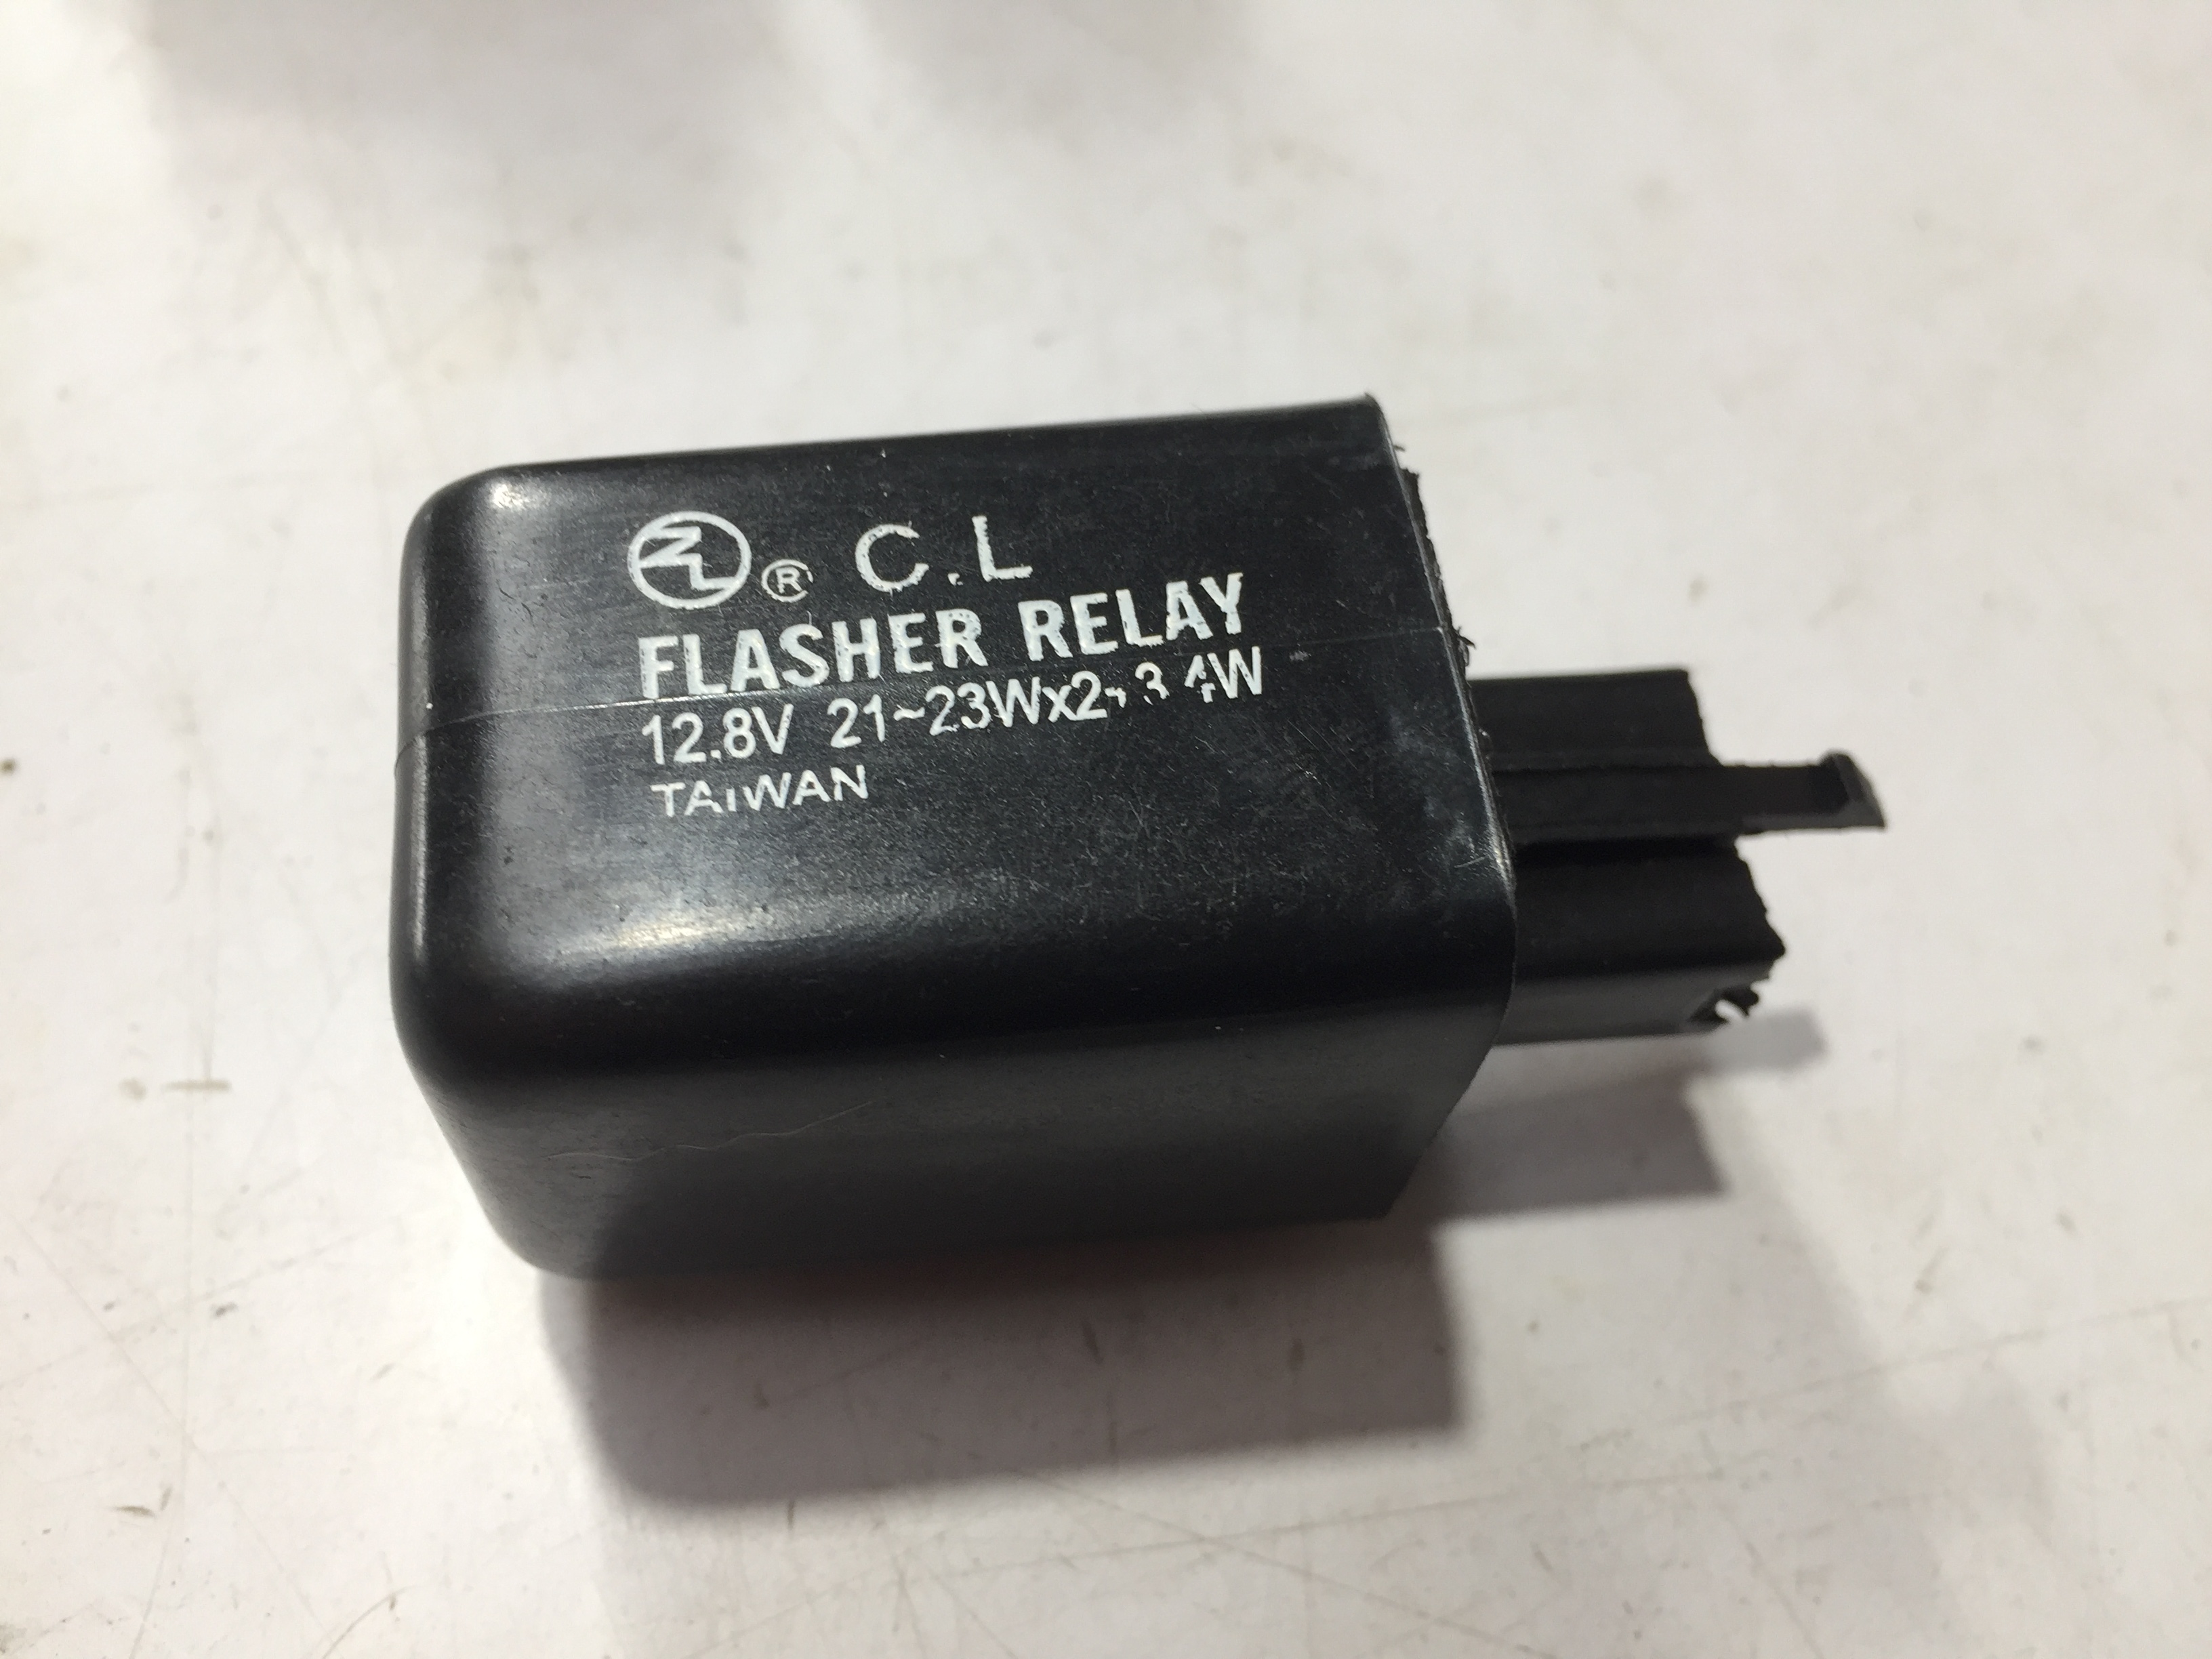 XR type Flasher relay.